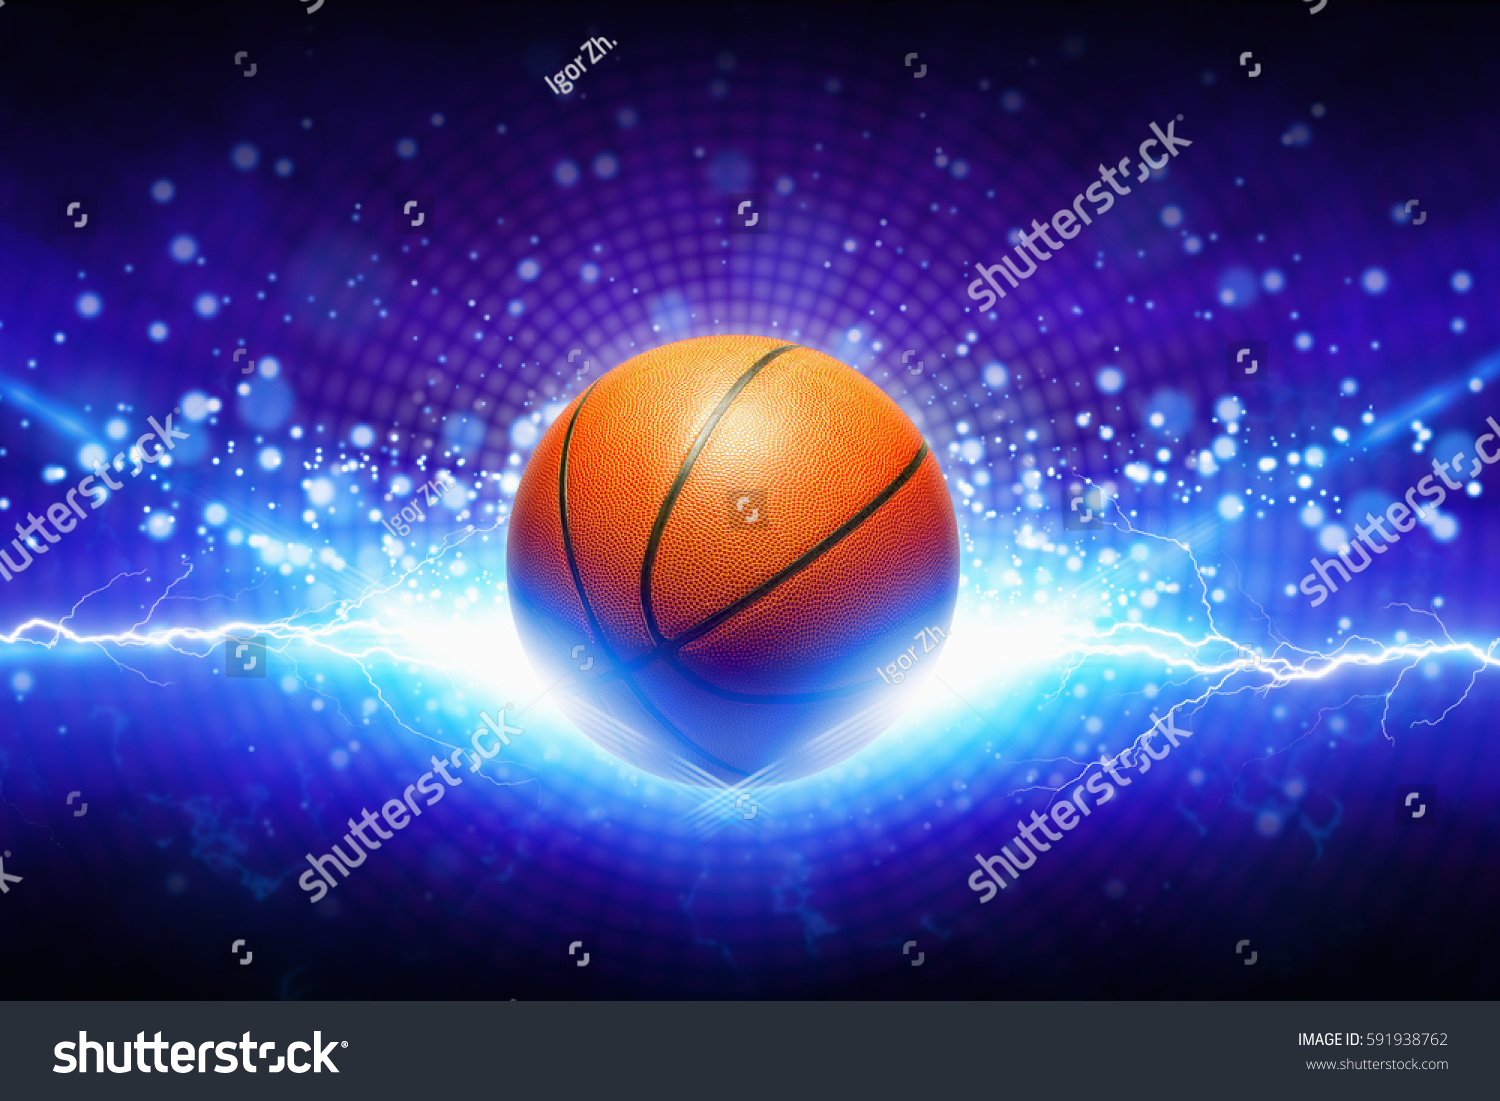 Abstract Sports Background Basketball Powerful Blue Stock Photo